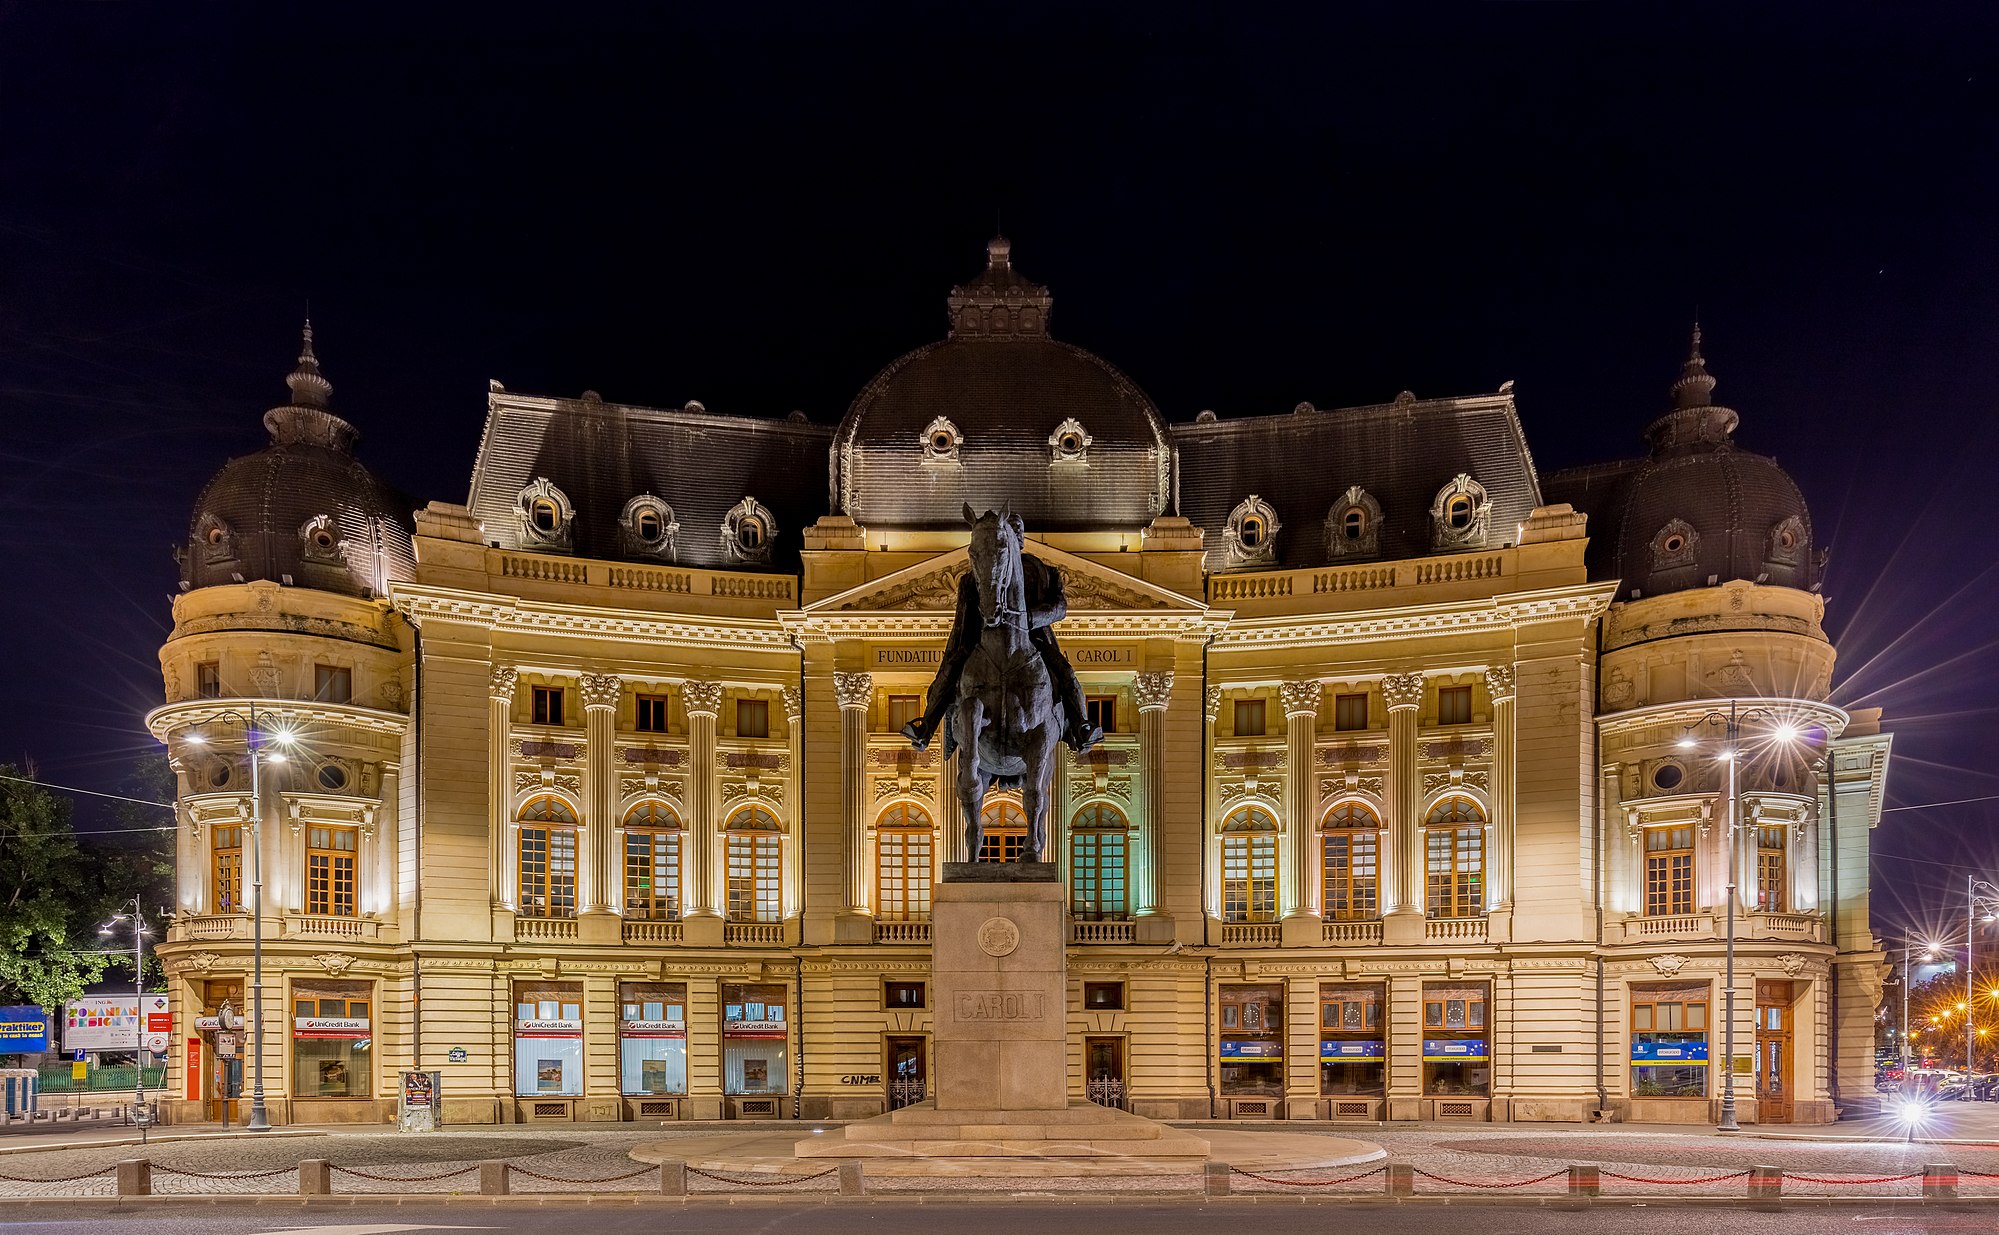 Frontal view of the Central University Library of Bucharest and Carol I statue, Bucharest, Romania. The Central University Library was founded in 1895, 31 years after the foundation of the University of Bucharest, as the Carol I Library of the University Foundation. The building, designed by French architect Paul Gottereau, was completed in 1893 and opened on 14 March 1895. The volume collection has grown steadily from 3,400 volumes in 1899 to over 2 million in 1970.